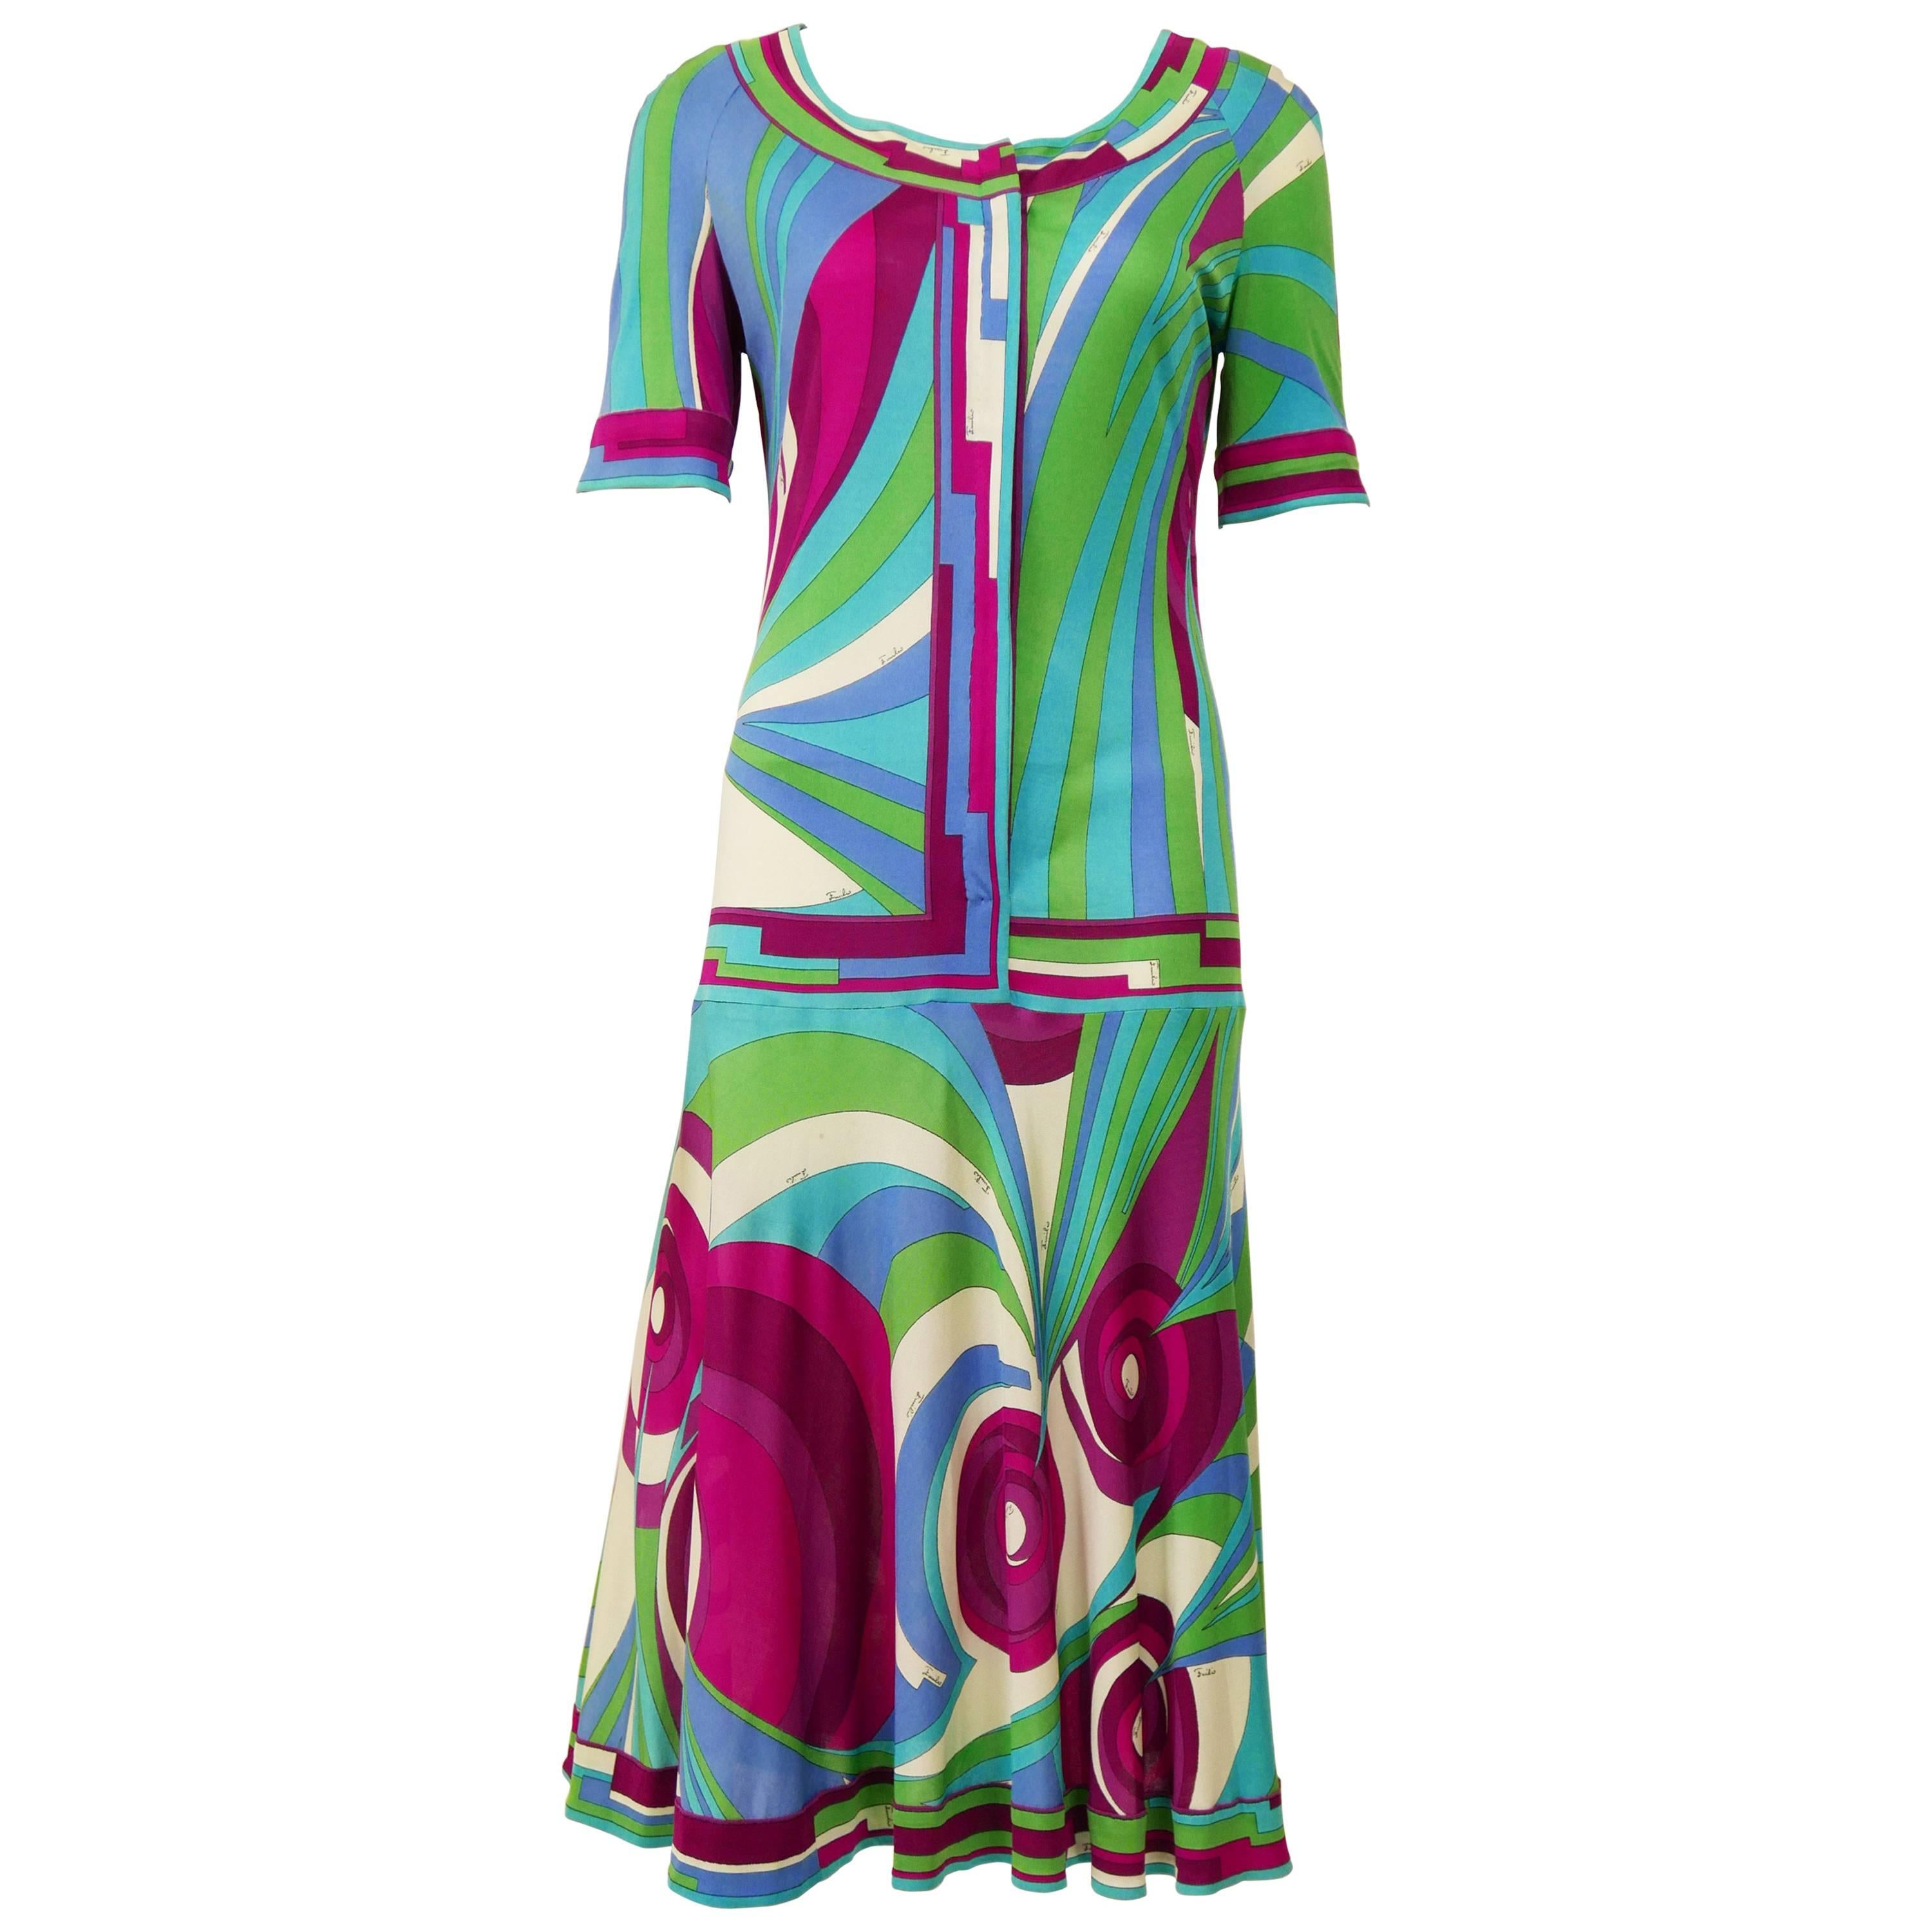 1970s EMILIO PUCCI Colorful Jersey Day Dress